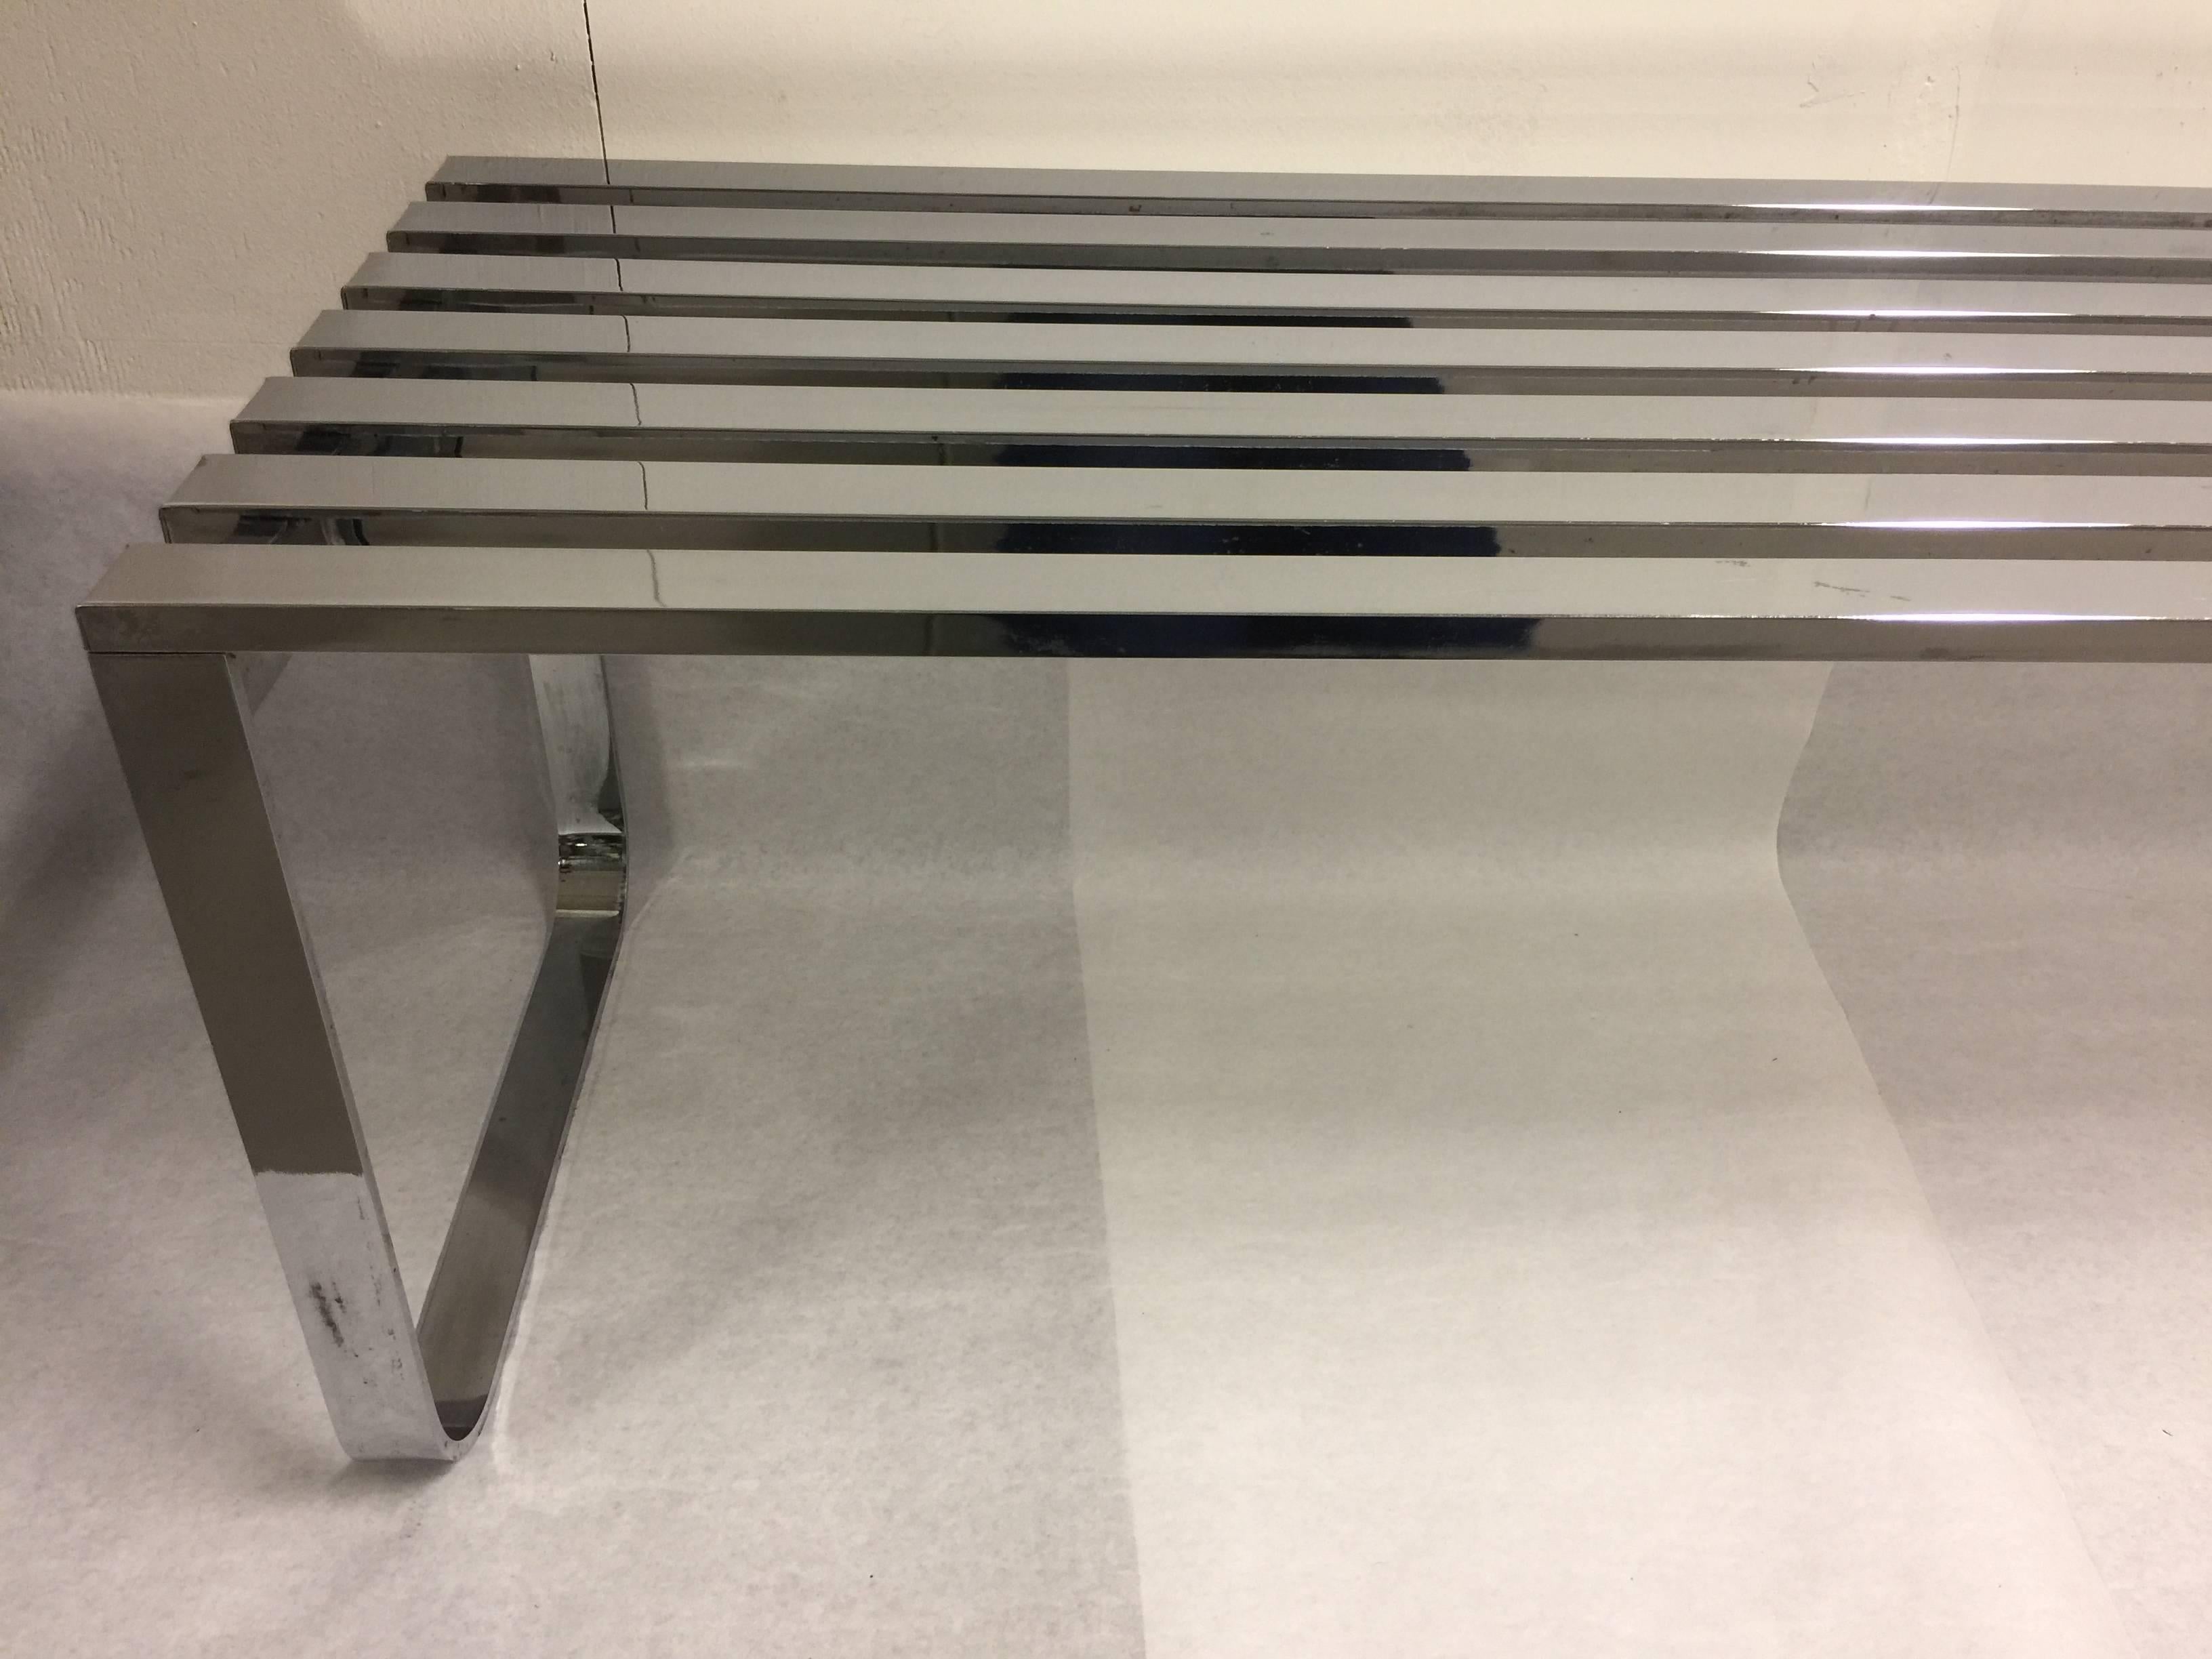 The perfect bench or coffee table. This vintage circa 1970s chrome-plated flat bar slat bench embodies chic. Squared legs with rounded corners support each side. Minimalist and modern.